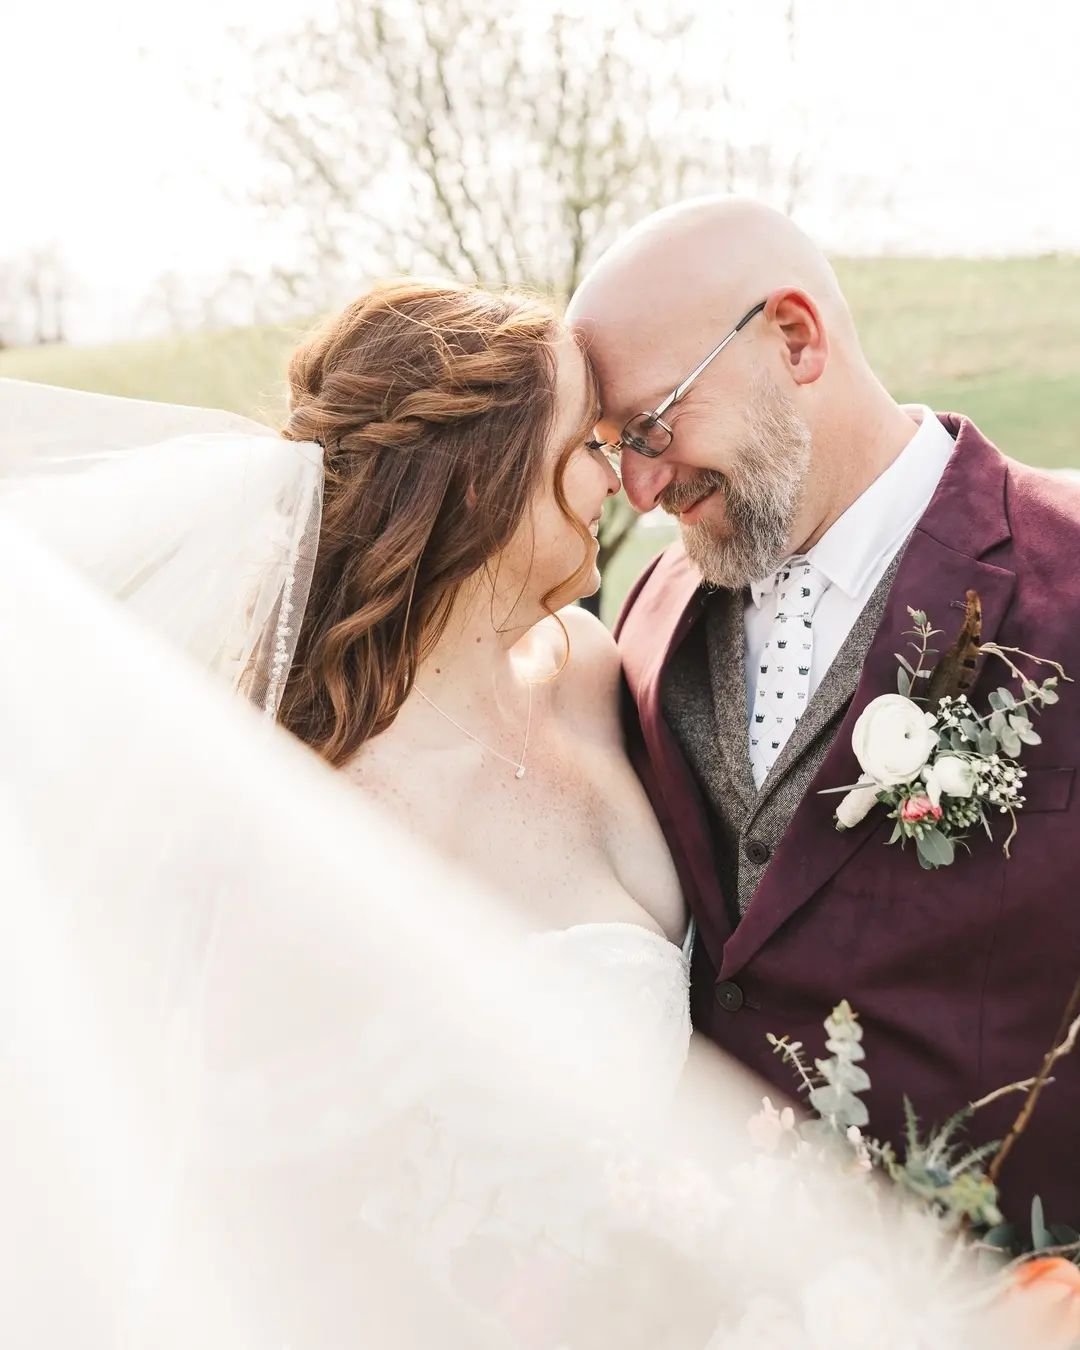 Kyle and Shannon had the perfect spring day for their wedding at Wissler Farm in Holtwood, PA last weekend. She surprised him with a dress that was totally different than he was expecting, and he surprised her by wearing a tie that was totally differ